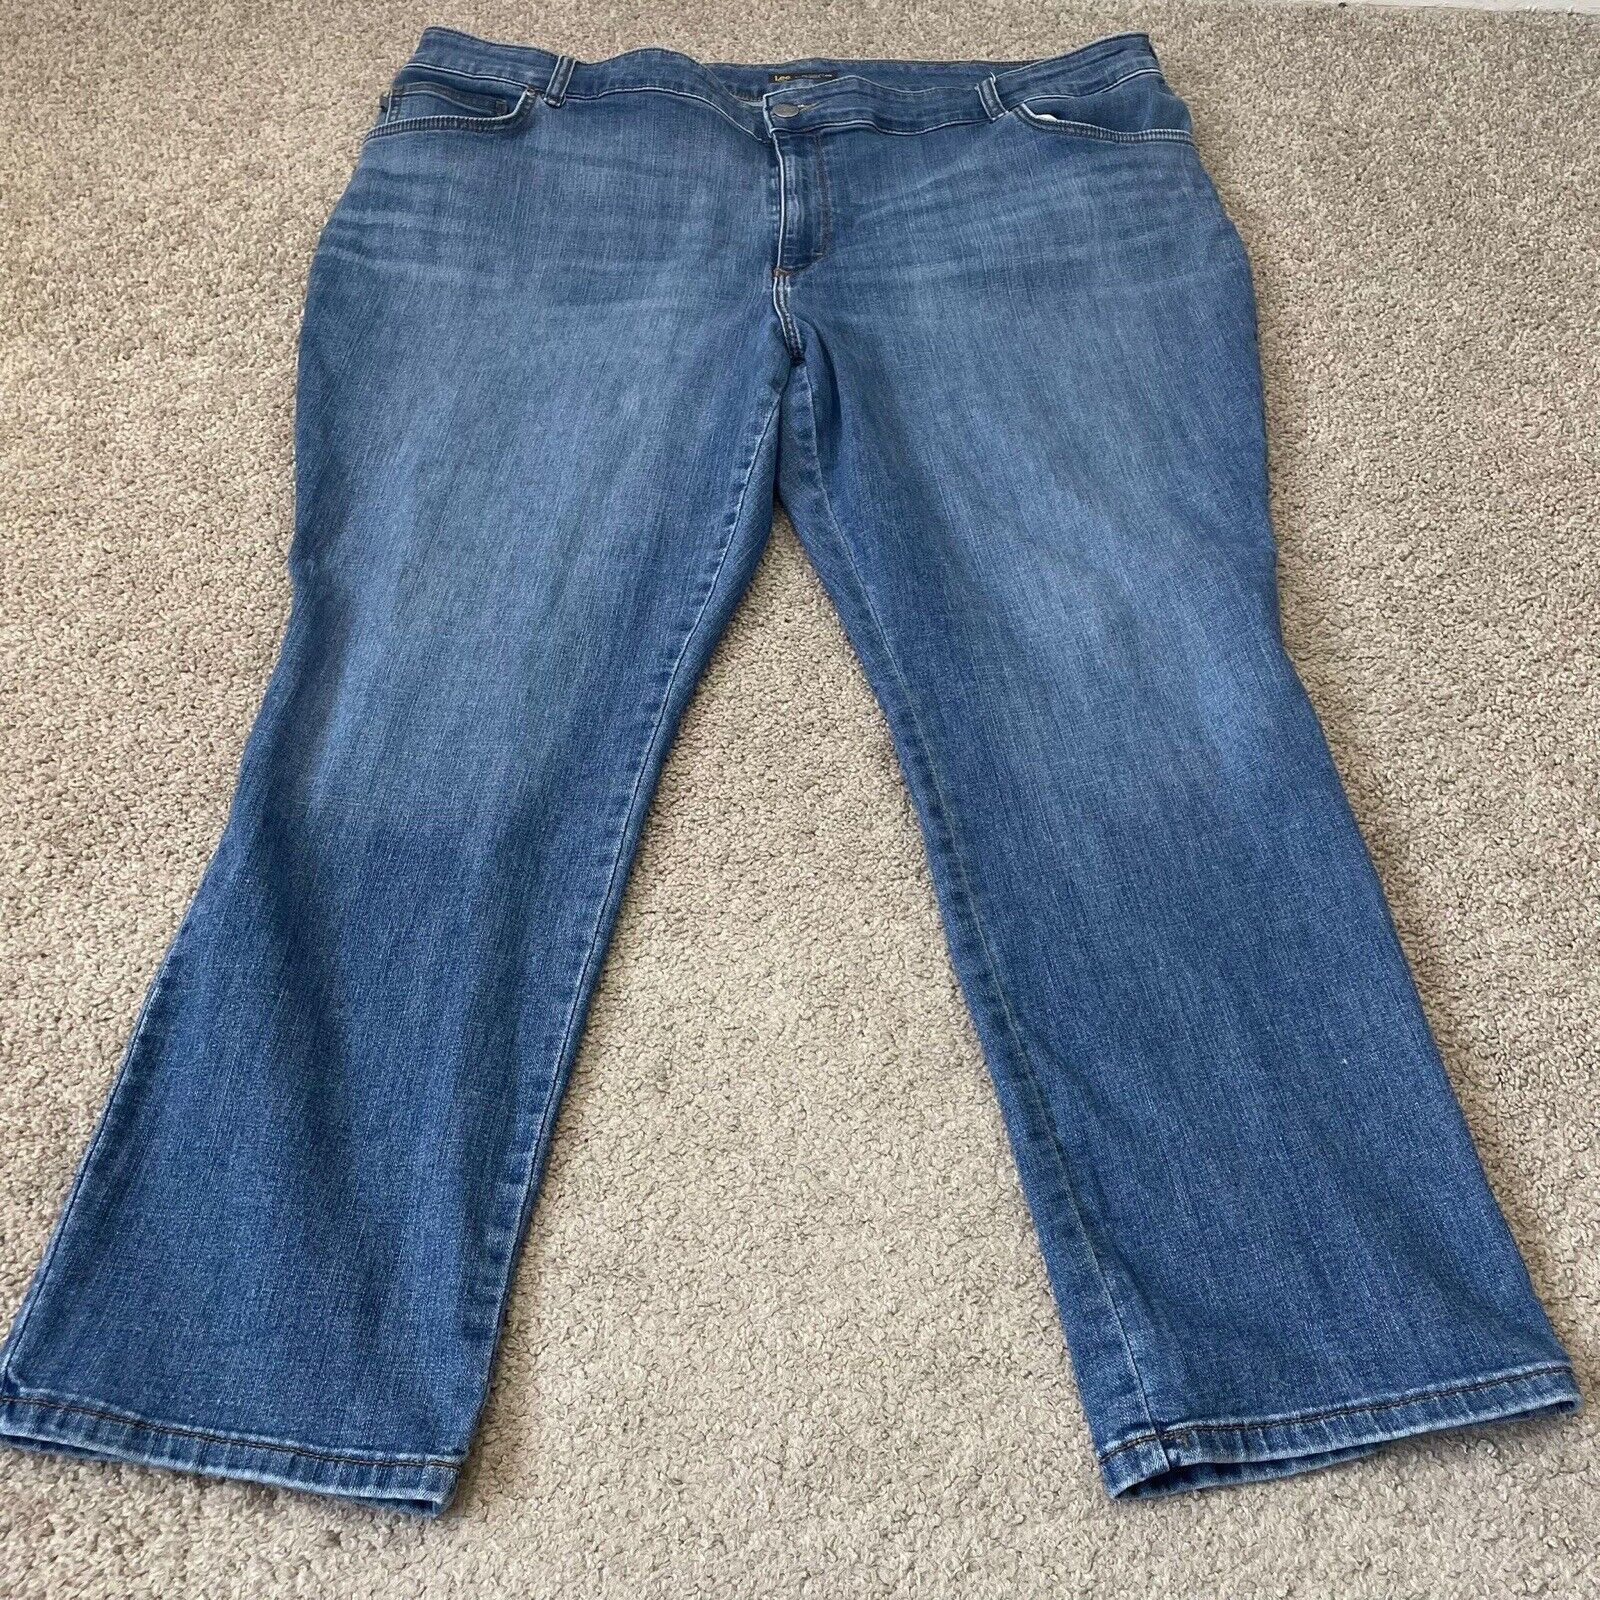 Lee Womens Jeans 26W Medium Relaxed Fit Mid Rise Straight Leg Stretch Blue Denim